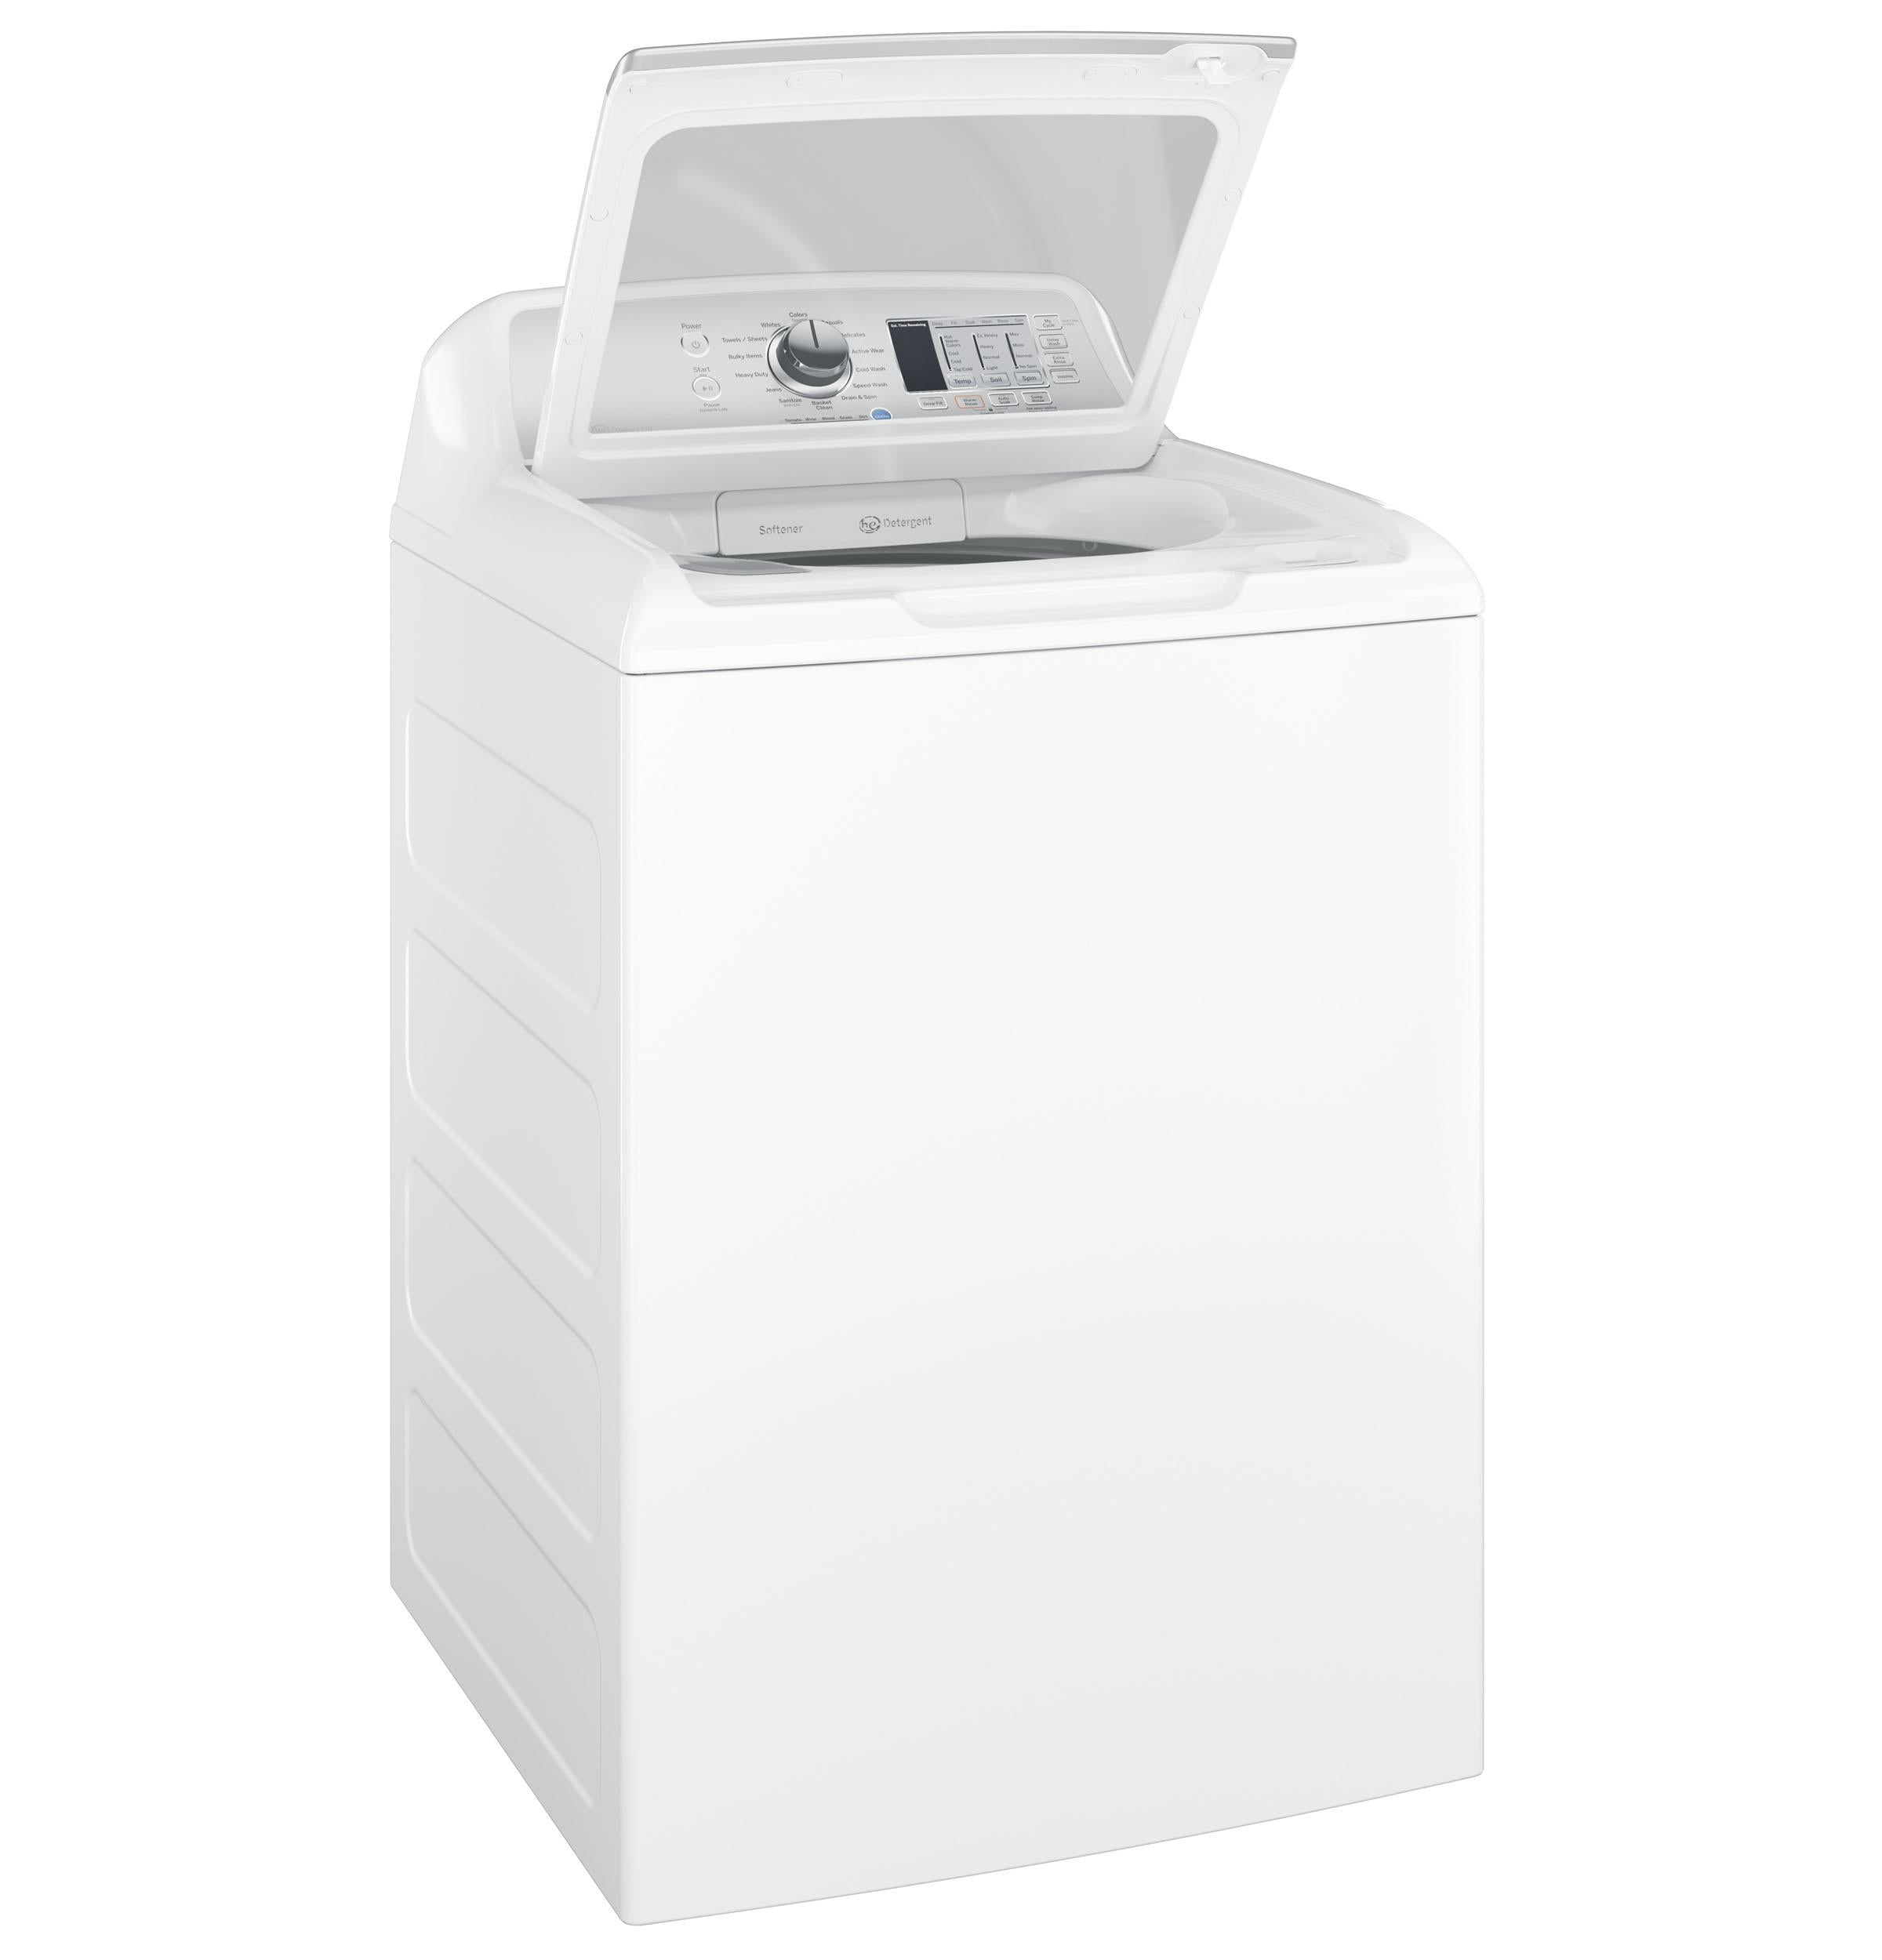 GE® ENERGY STAR® 4.5 cu. ft. Capacity Washer with Stainless Steel Basket